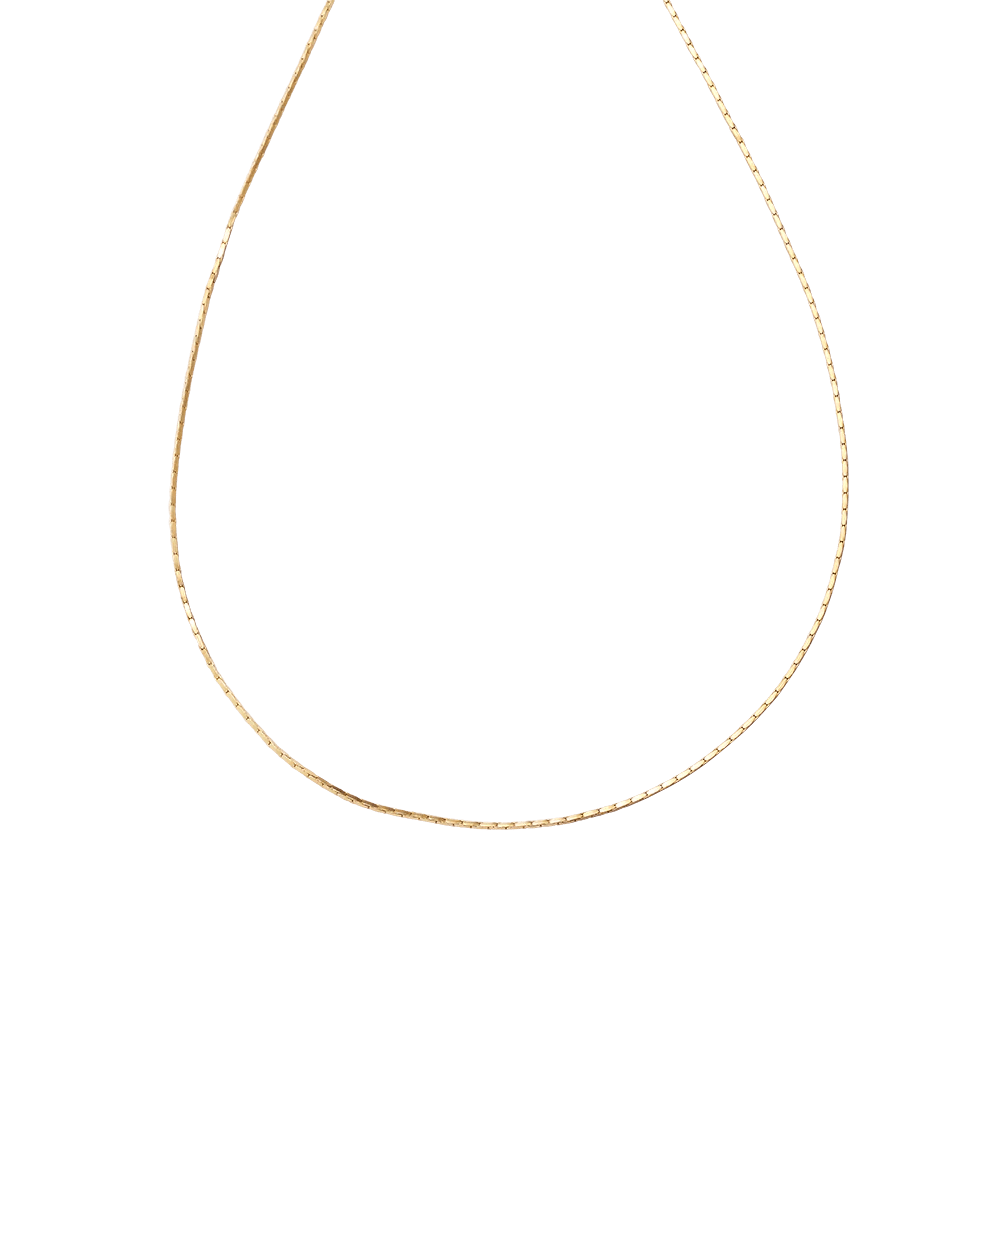 Kirstin Ash Necklaces Yellow Gold Idle Chocker Necklace